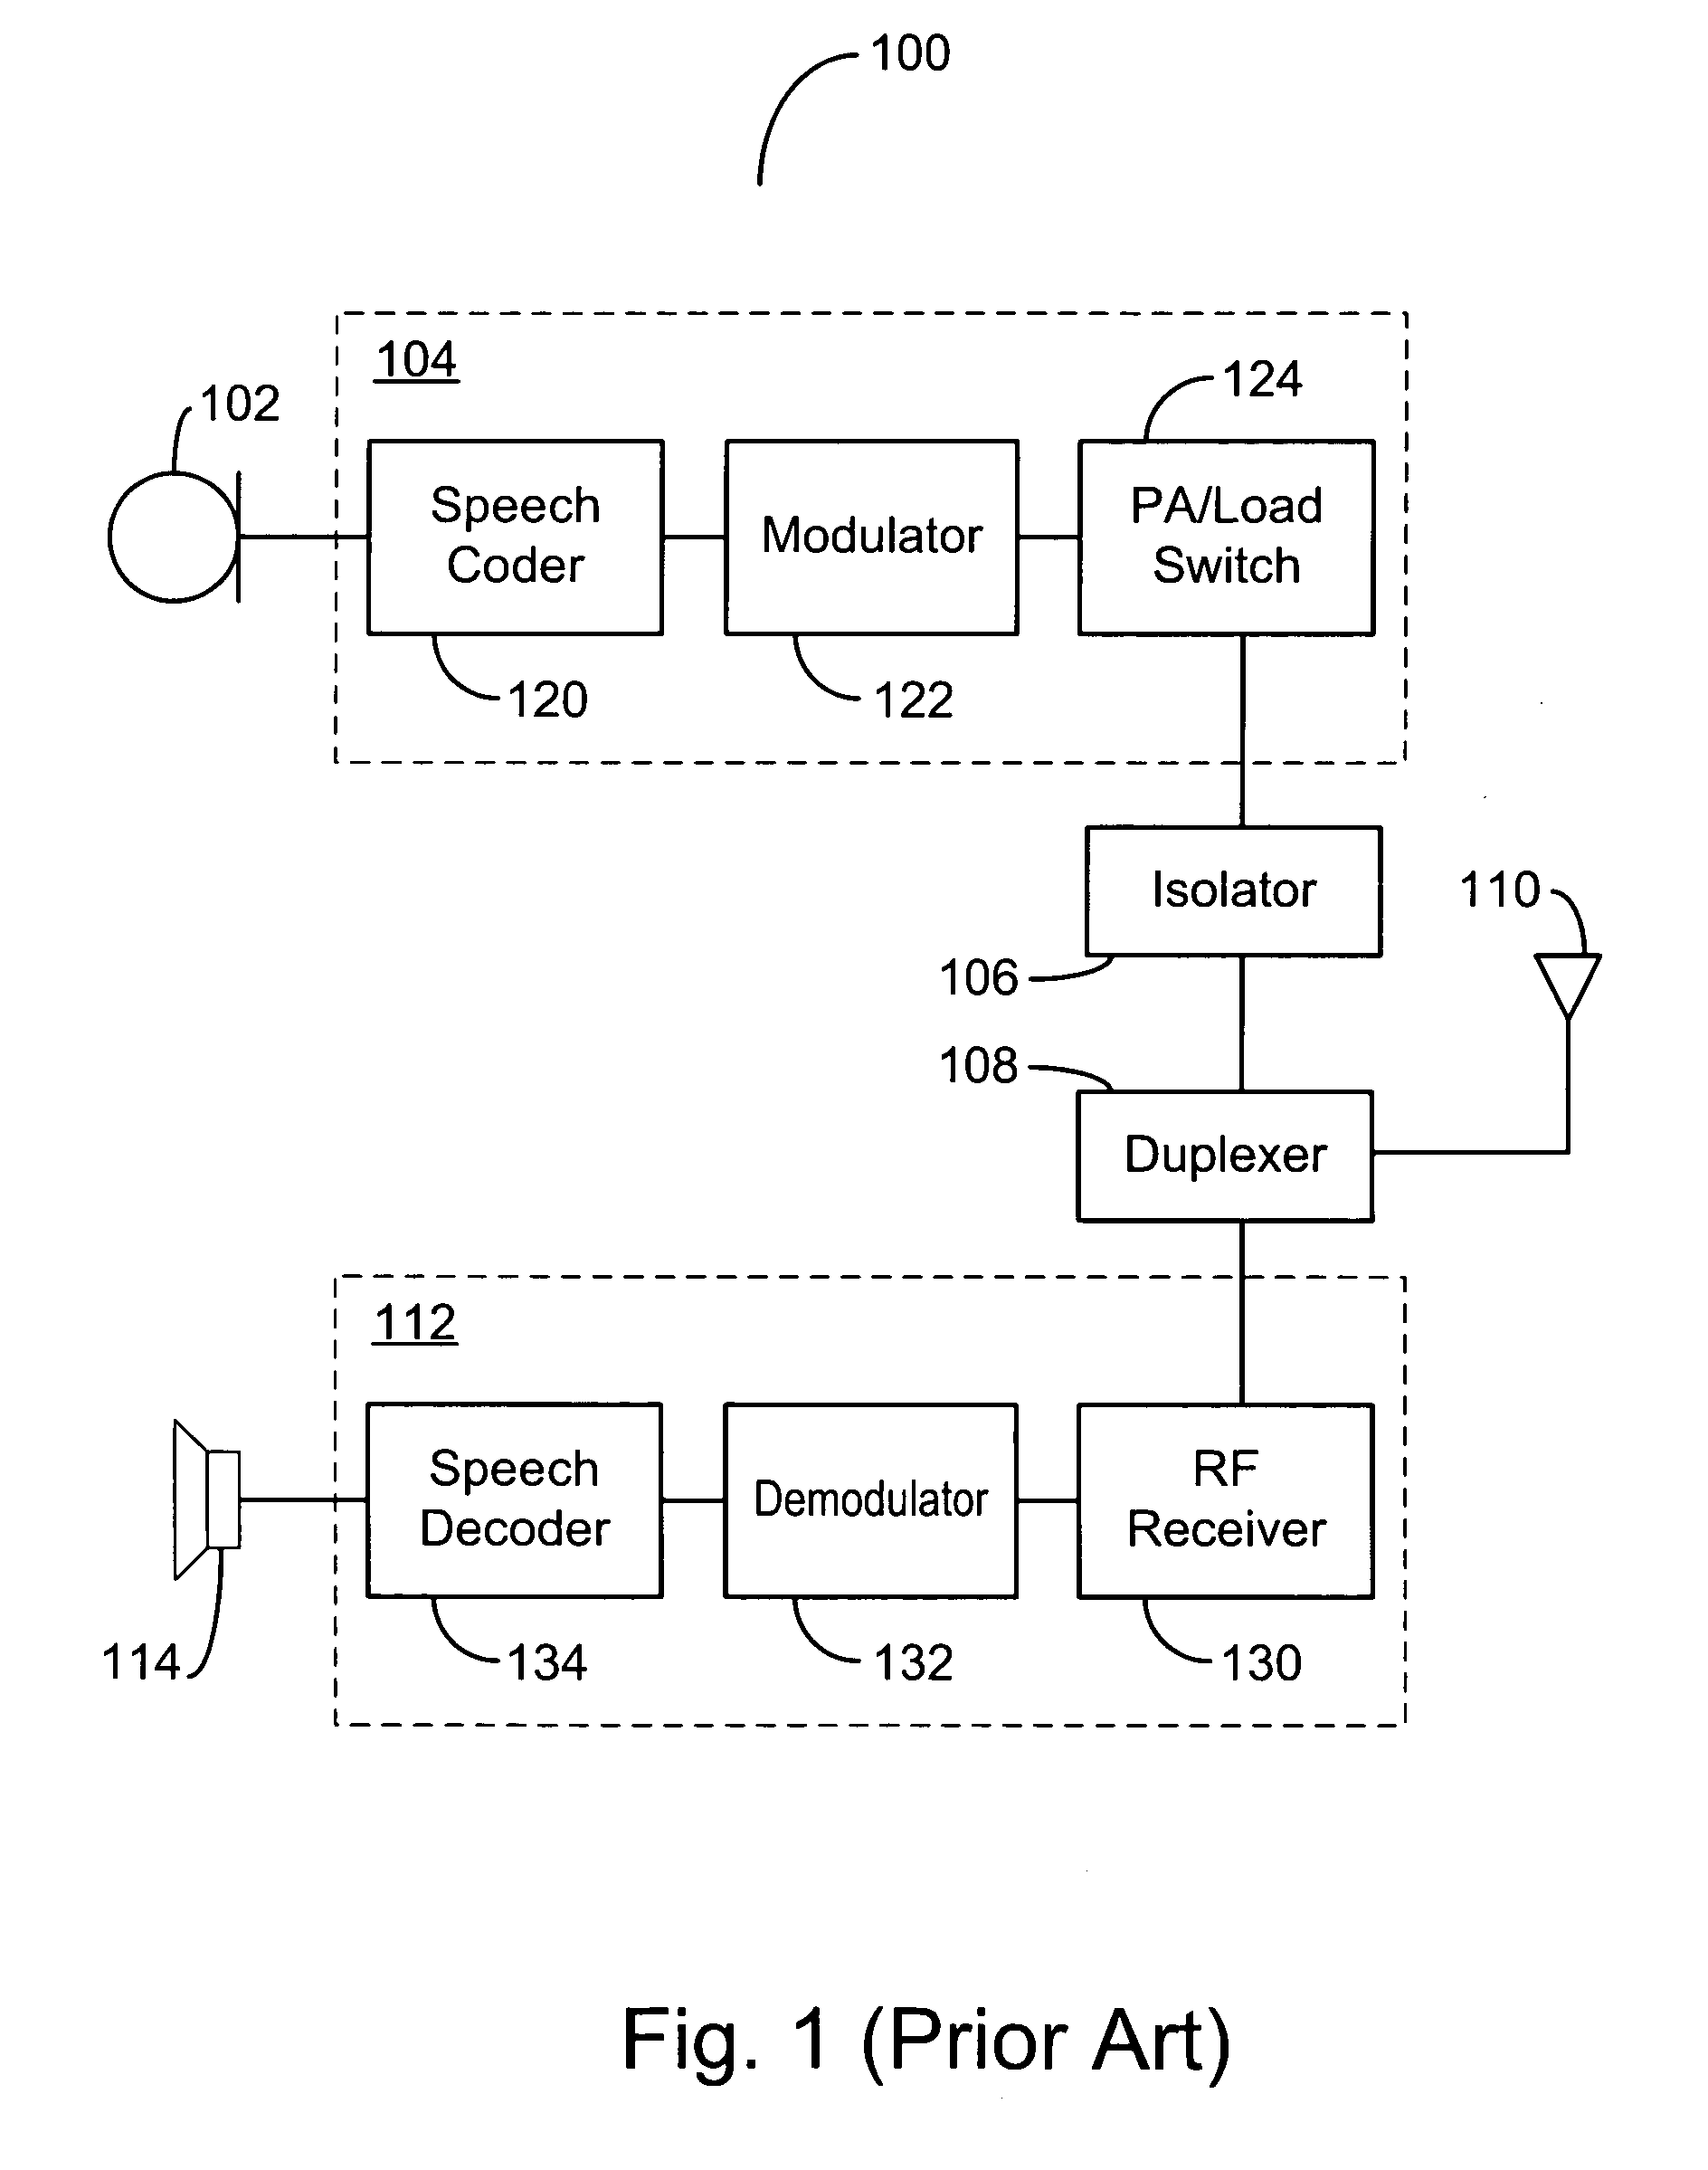 CDMA power amplifier design for low and high power modes